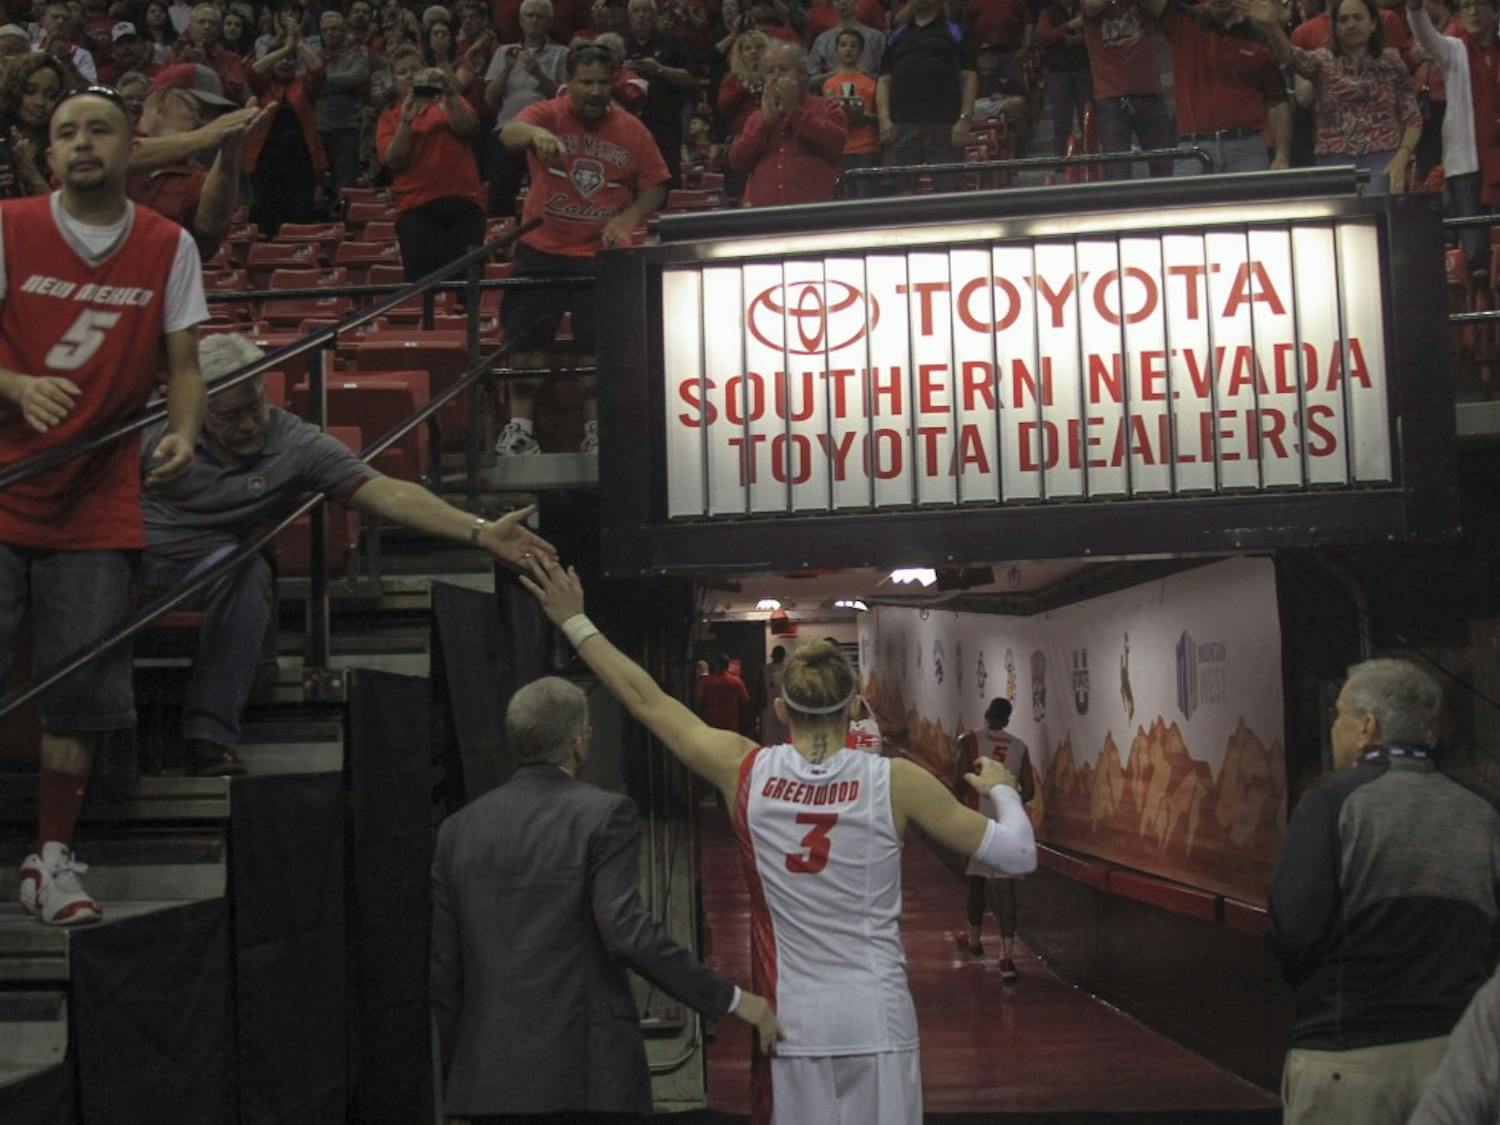 New Mexico senior guard Hugh Greenwood high-fives fans as he walks off the court for the last time Wednesday afternoon at the Thomas & Mack Center in Las Vegas. The Lobos lost to the Falcons in the Mountain West Basketball Championships for the first time since Greenwood joined the team in 2011-12.